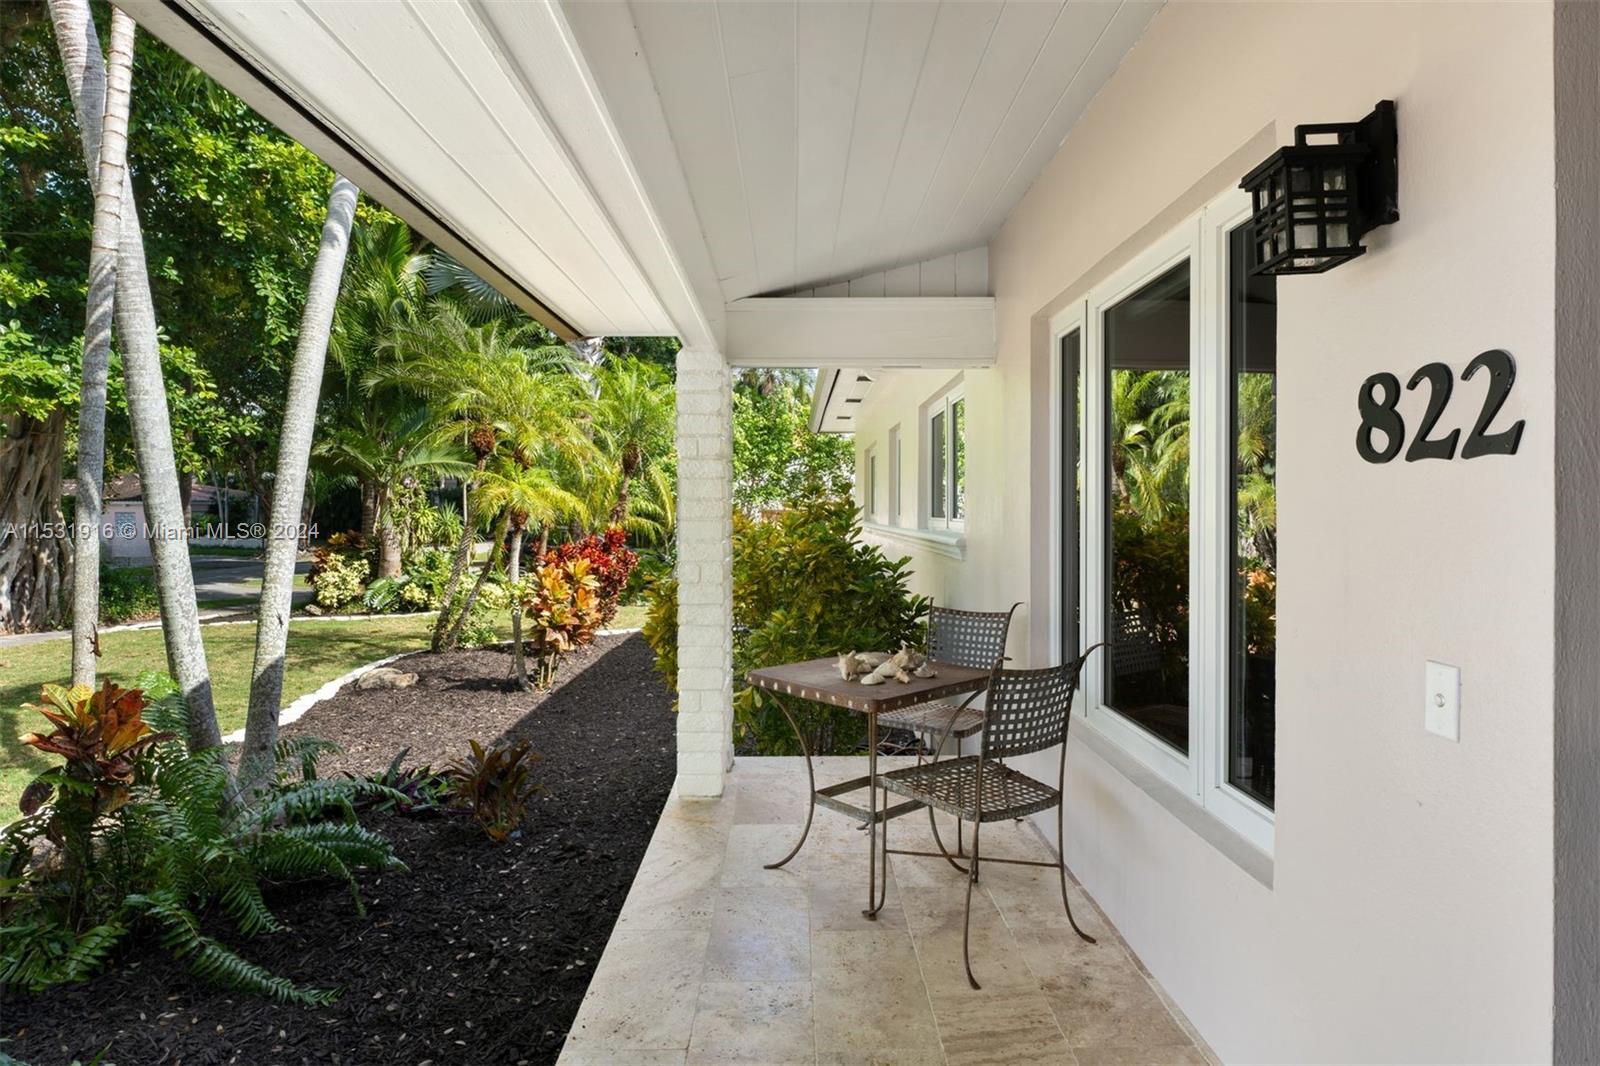 [Almeria No.822]  A fully renovated home located on one of the most photographed streets in Coral Gables. Its 2019 expansion and updates include a generous-sized primary suite plus all-new kitchen + baths. Its rebirth includes restored Dade County Pine floors, impact windows/doors and new tile roof. The home’s sleek design seamlessly blends modern luxury with its original 1950 charisma. The 12,500 SF lot allows for further expansion and/or pool. Now for the best part: this gem is located yards from the historic Venetian Pool and the De Soto Fountain. A further stroll will lead you to The Biltmore/Golf/Tennis and equidistant to downtown CG with its 40+ restaurants, theatres and shoppes. No shortage of nearby schools as well-- whether public or private. Schedule your private tour today!